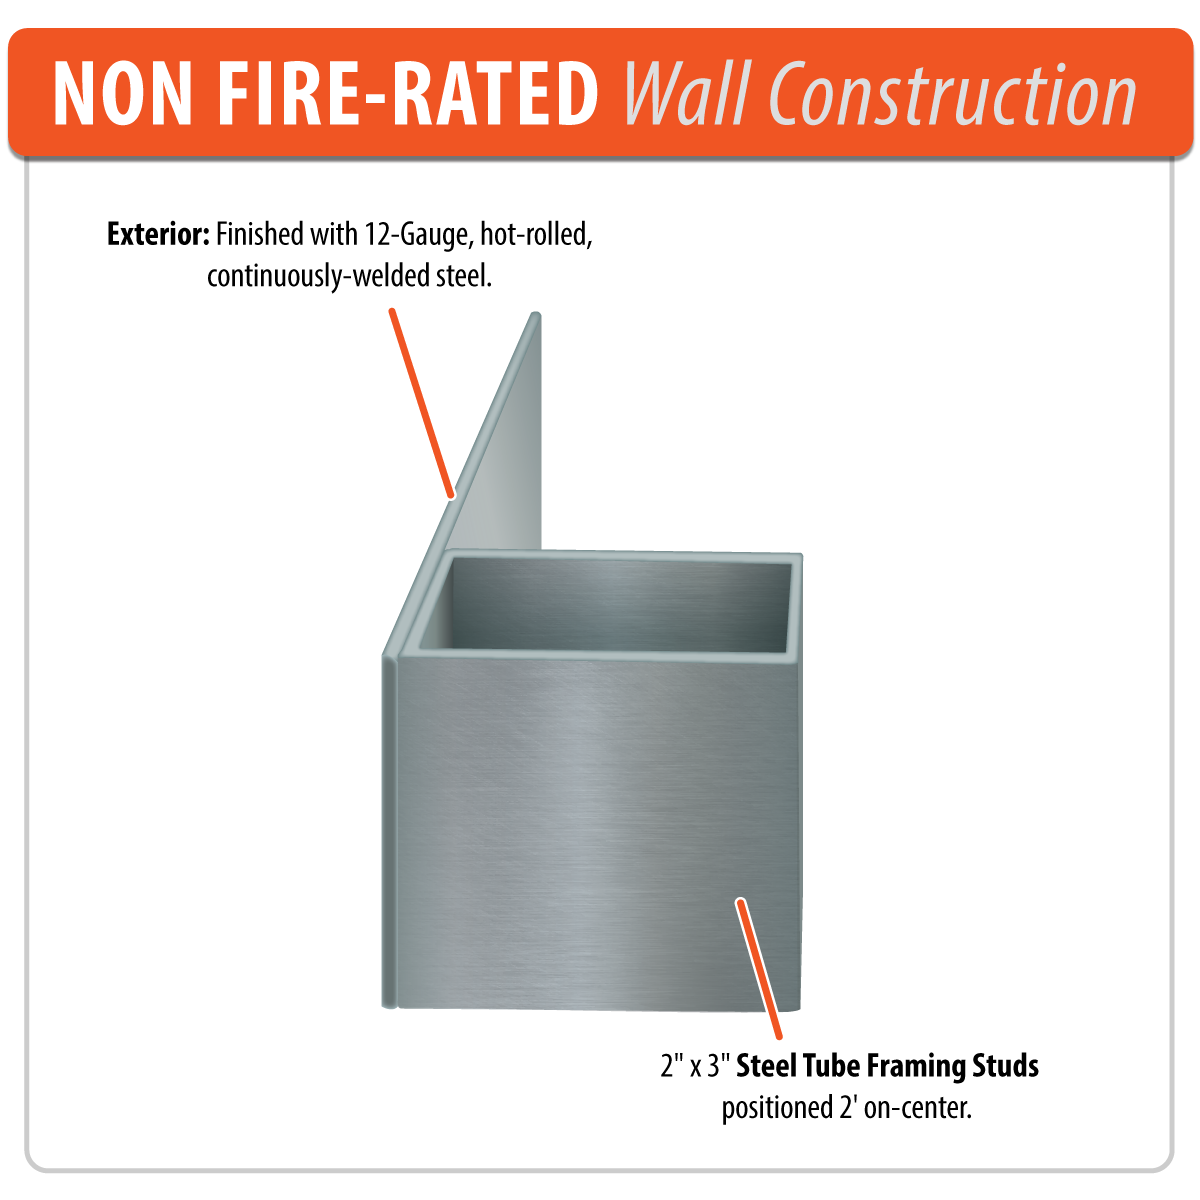 Non Fire-Rated Wall Construction Feature - No Insulation